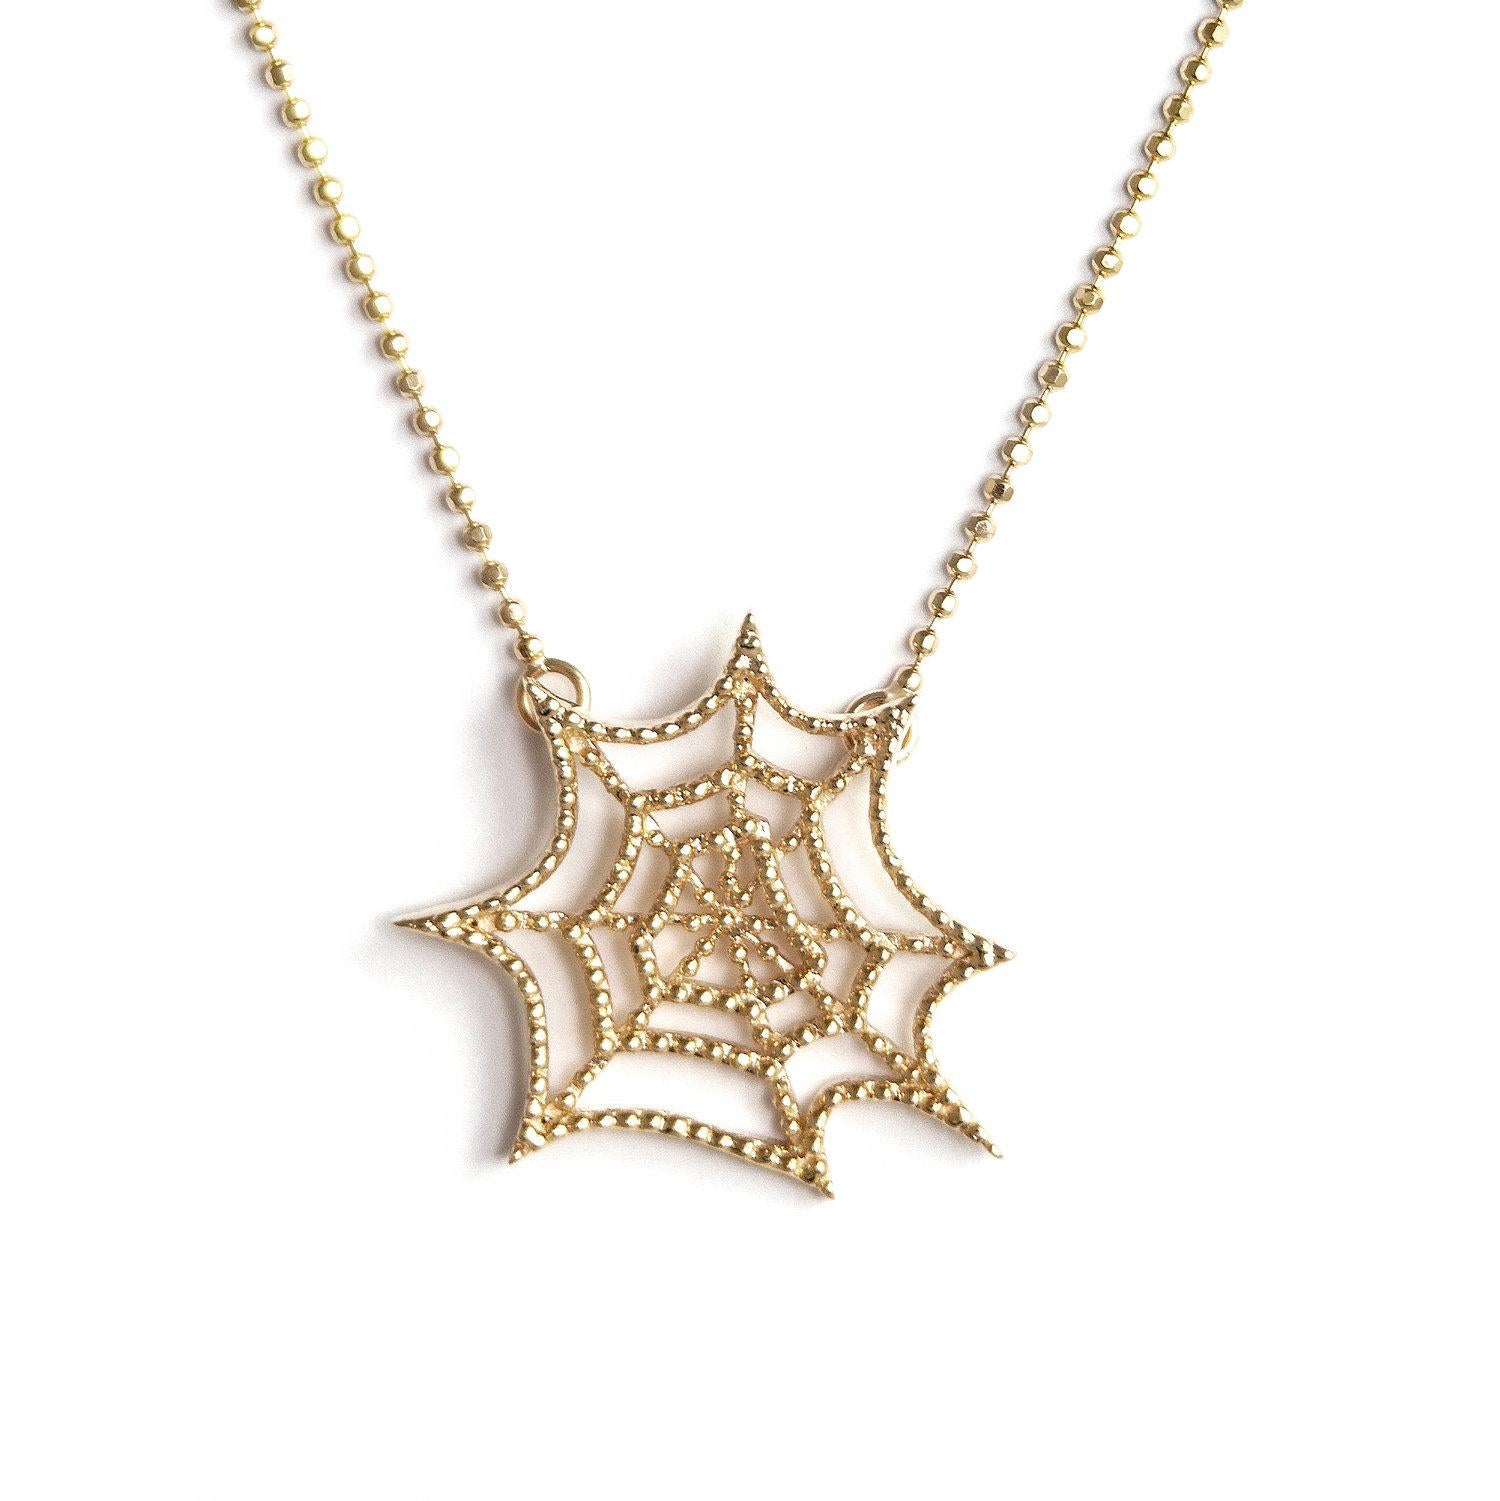 JHERWITT 14k Yellow Gold Plated Spiderweb Pendant Necklace   In New Condition For Sale In Los Angeles, CA